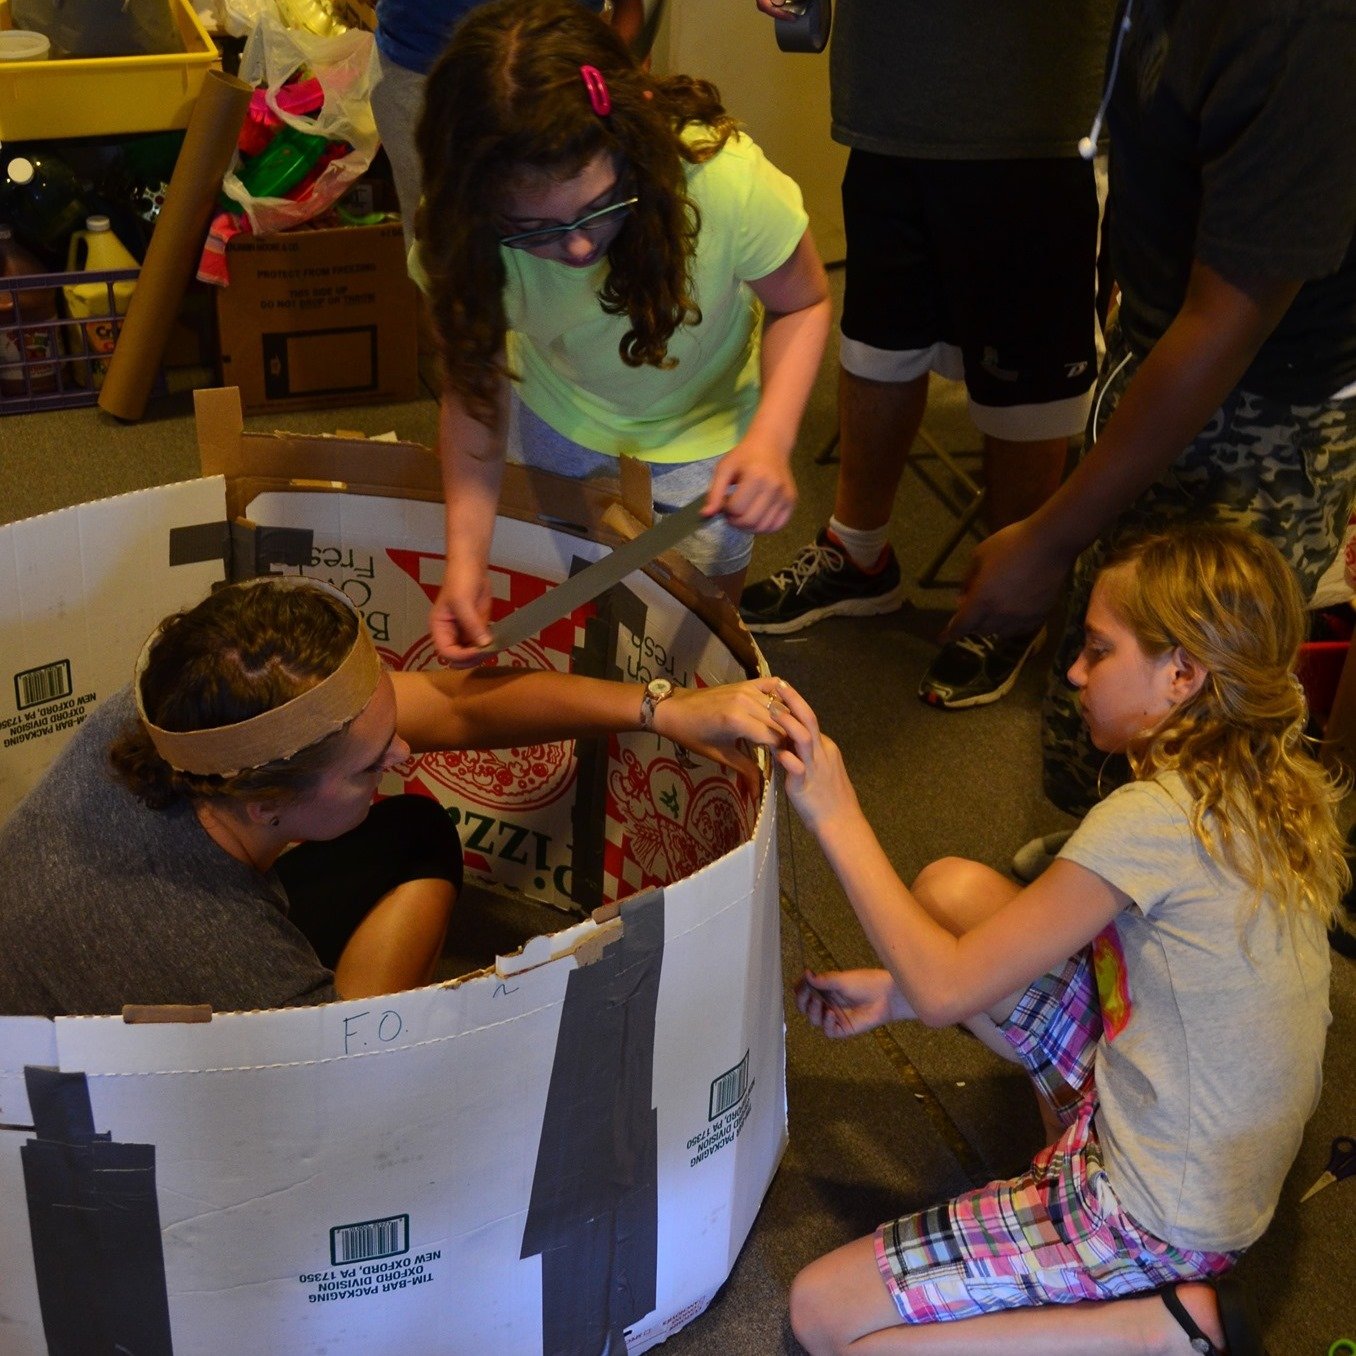 Happy Earth Day! One of our favorite things to do in our programs is find creative ways to reuse materials! Check out this #throwback from summer camp in 2014 where we turned pizza boxes into our dragon nest! 

We can't wait to see what creative ways